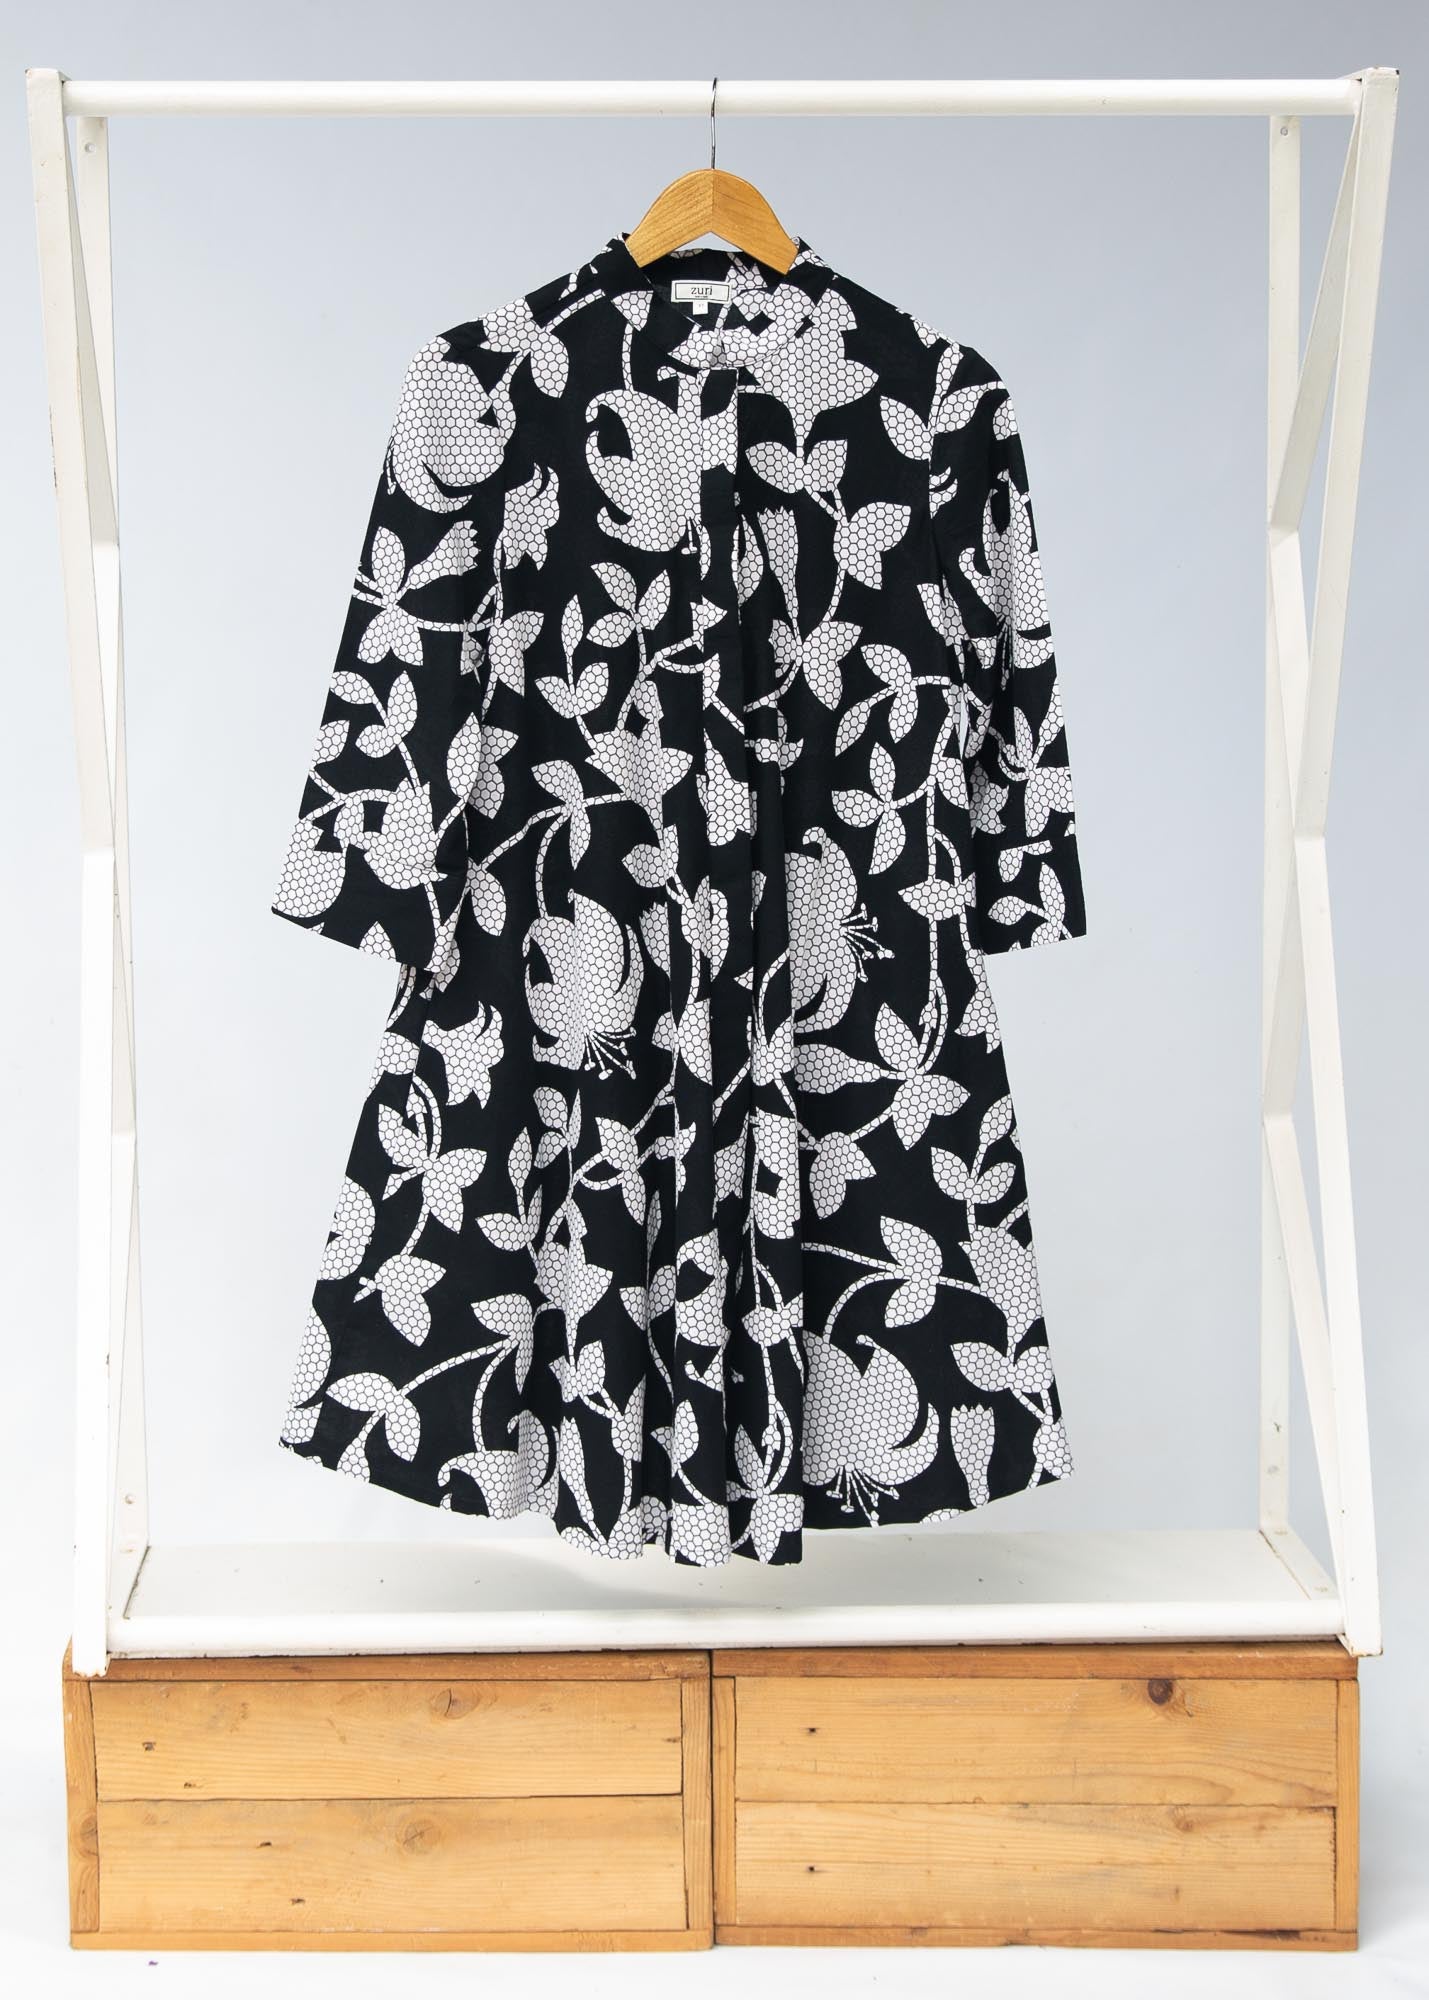 Display of  black dress with white and gray leaf print